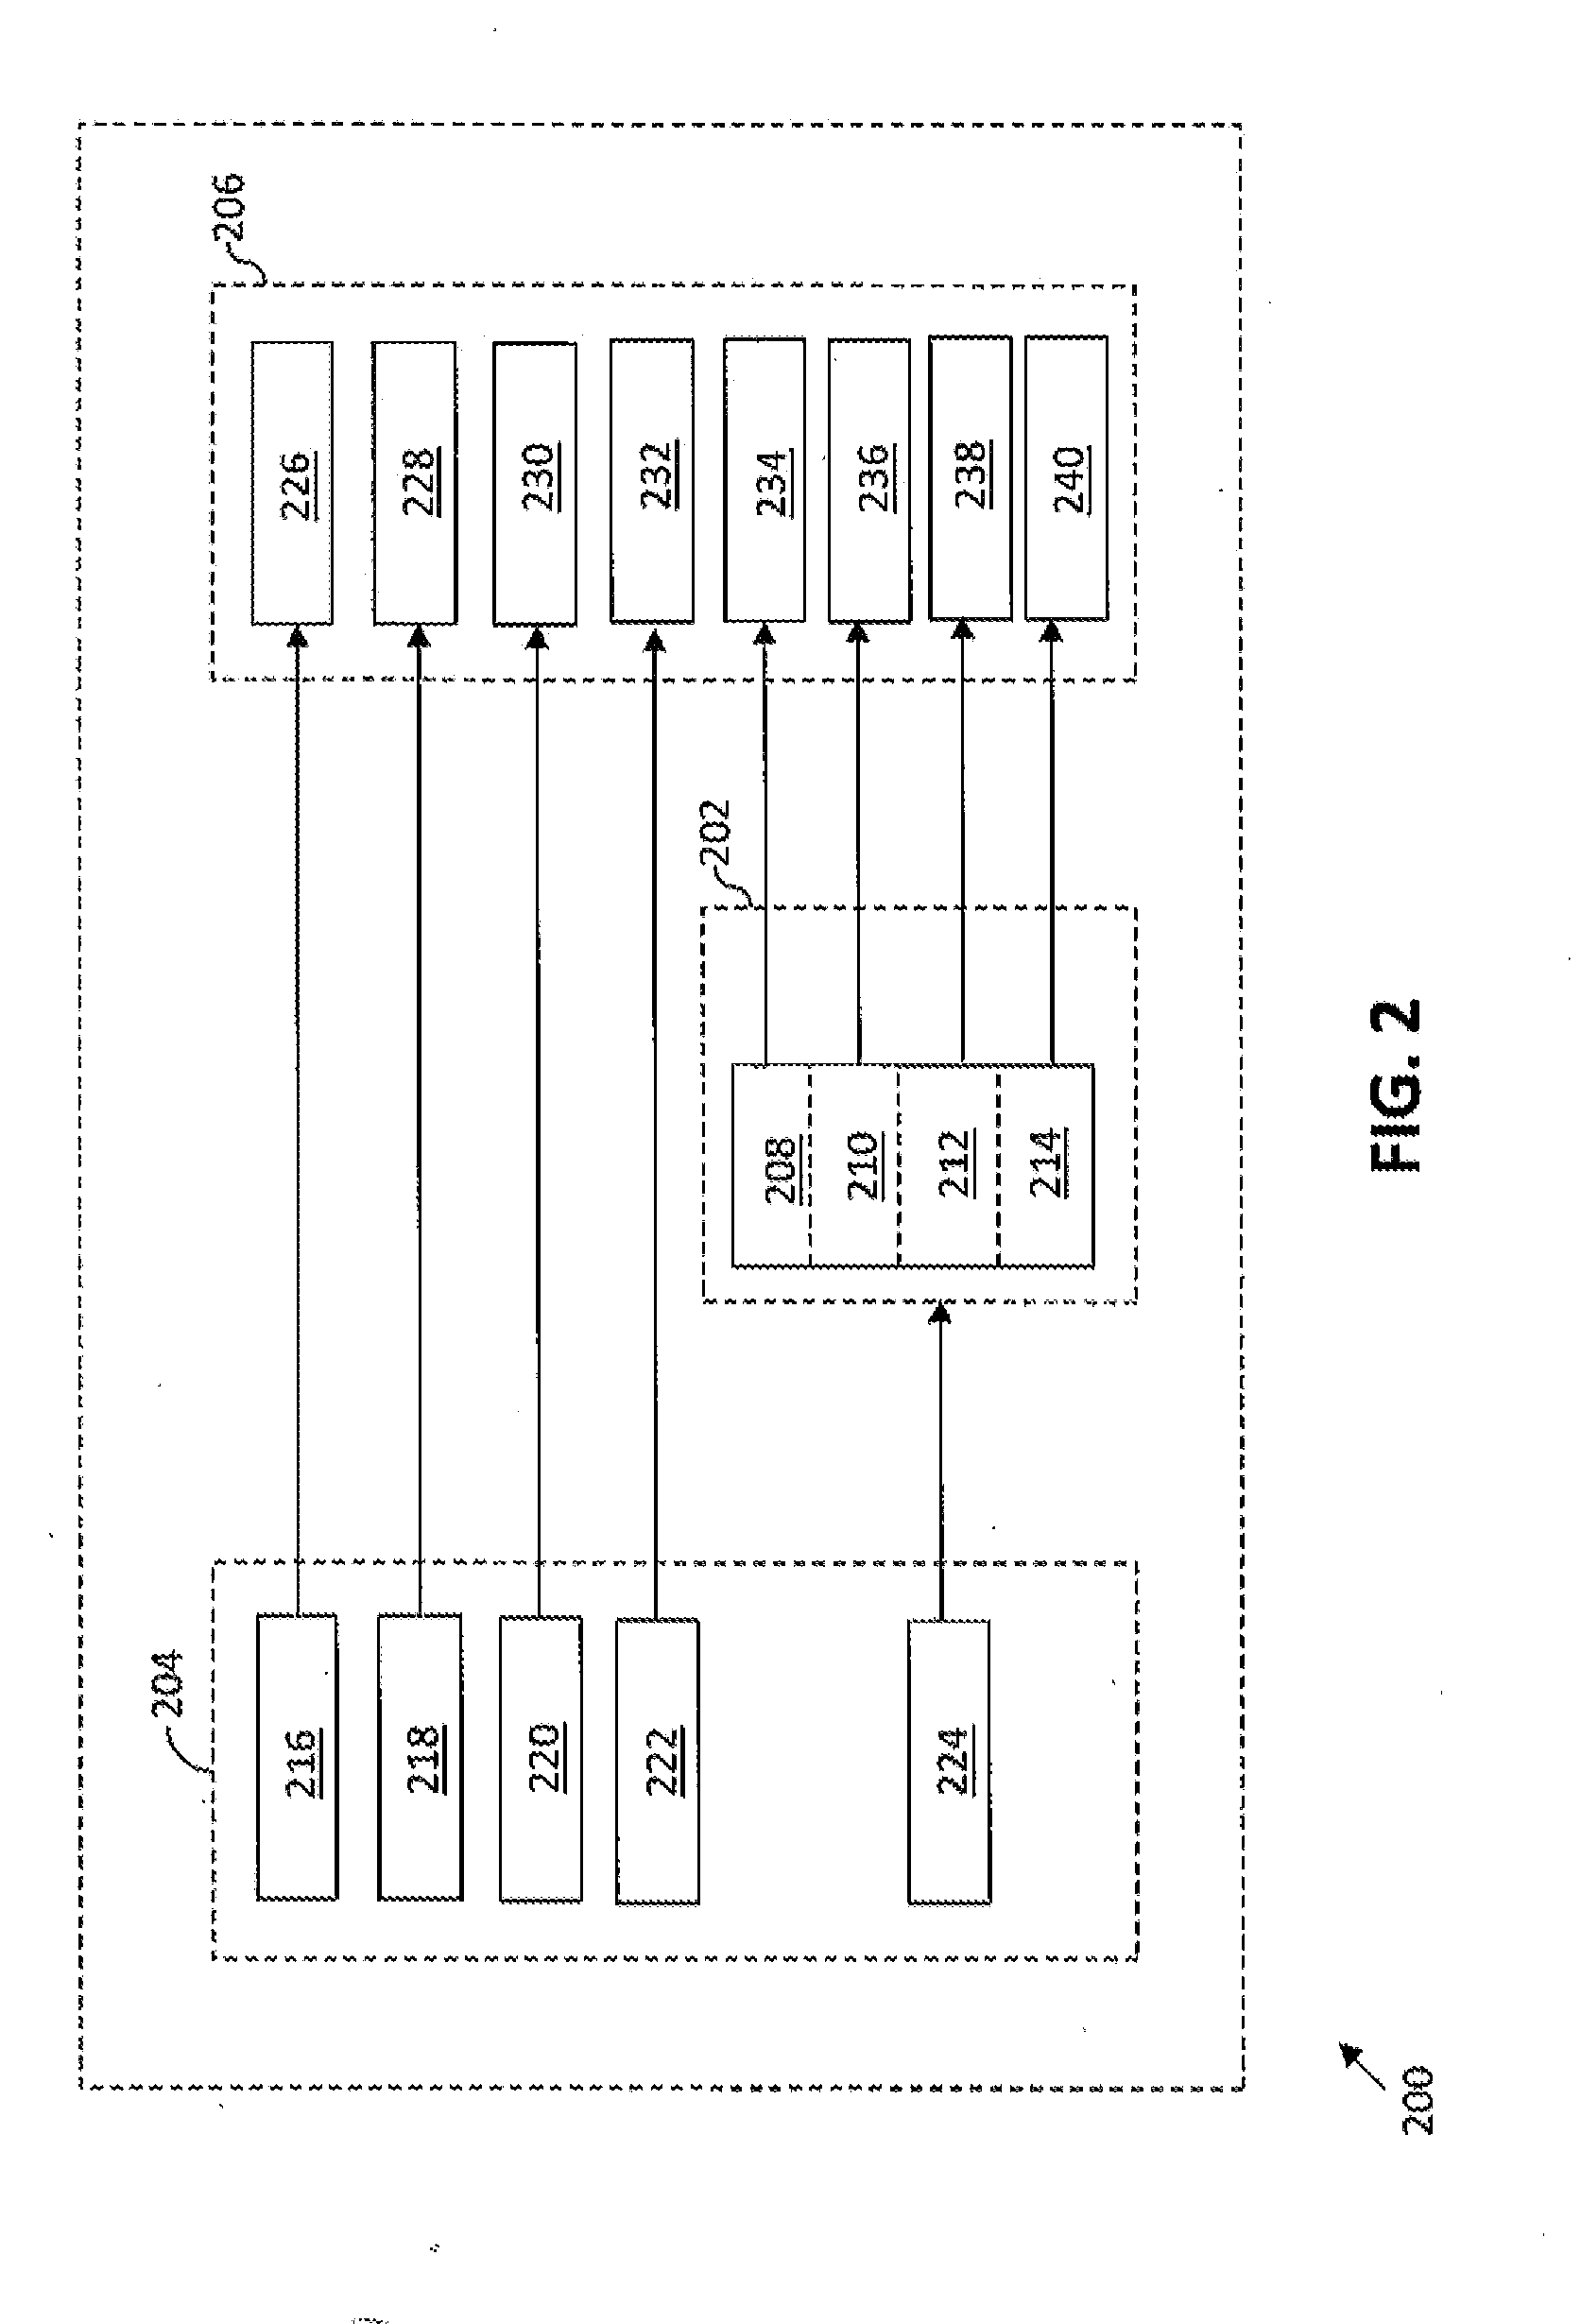 SYSTEM AND METHOD FOR CREATING LOGICAL RADIO LINK CONTROL (RLC) AND MEDIUM ACCESS CONTROL (MAC) PROTOCOL DATA UNITS (PDUs) IN MOBILE COMMUNICATION SYSTEM